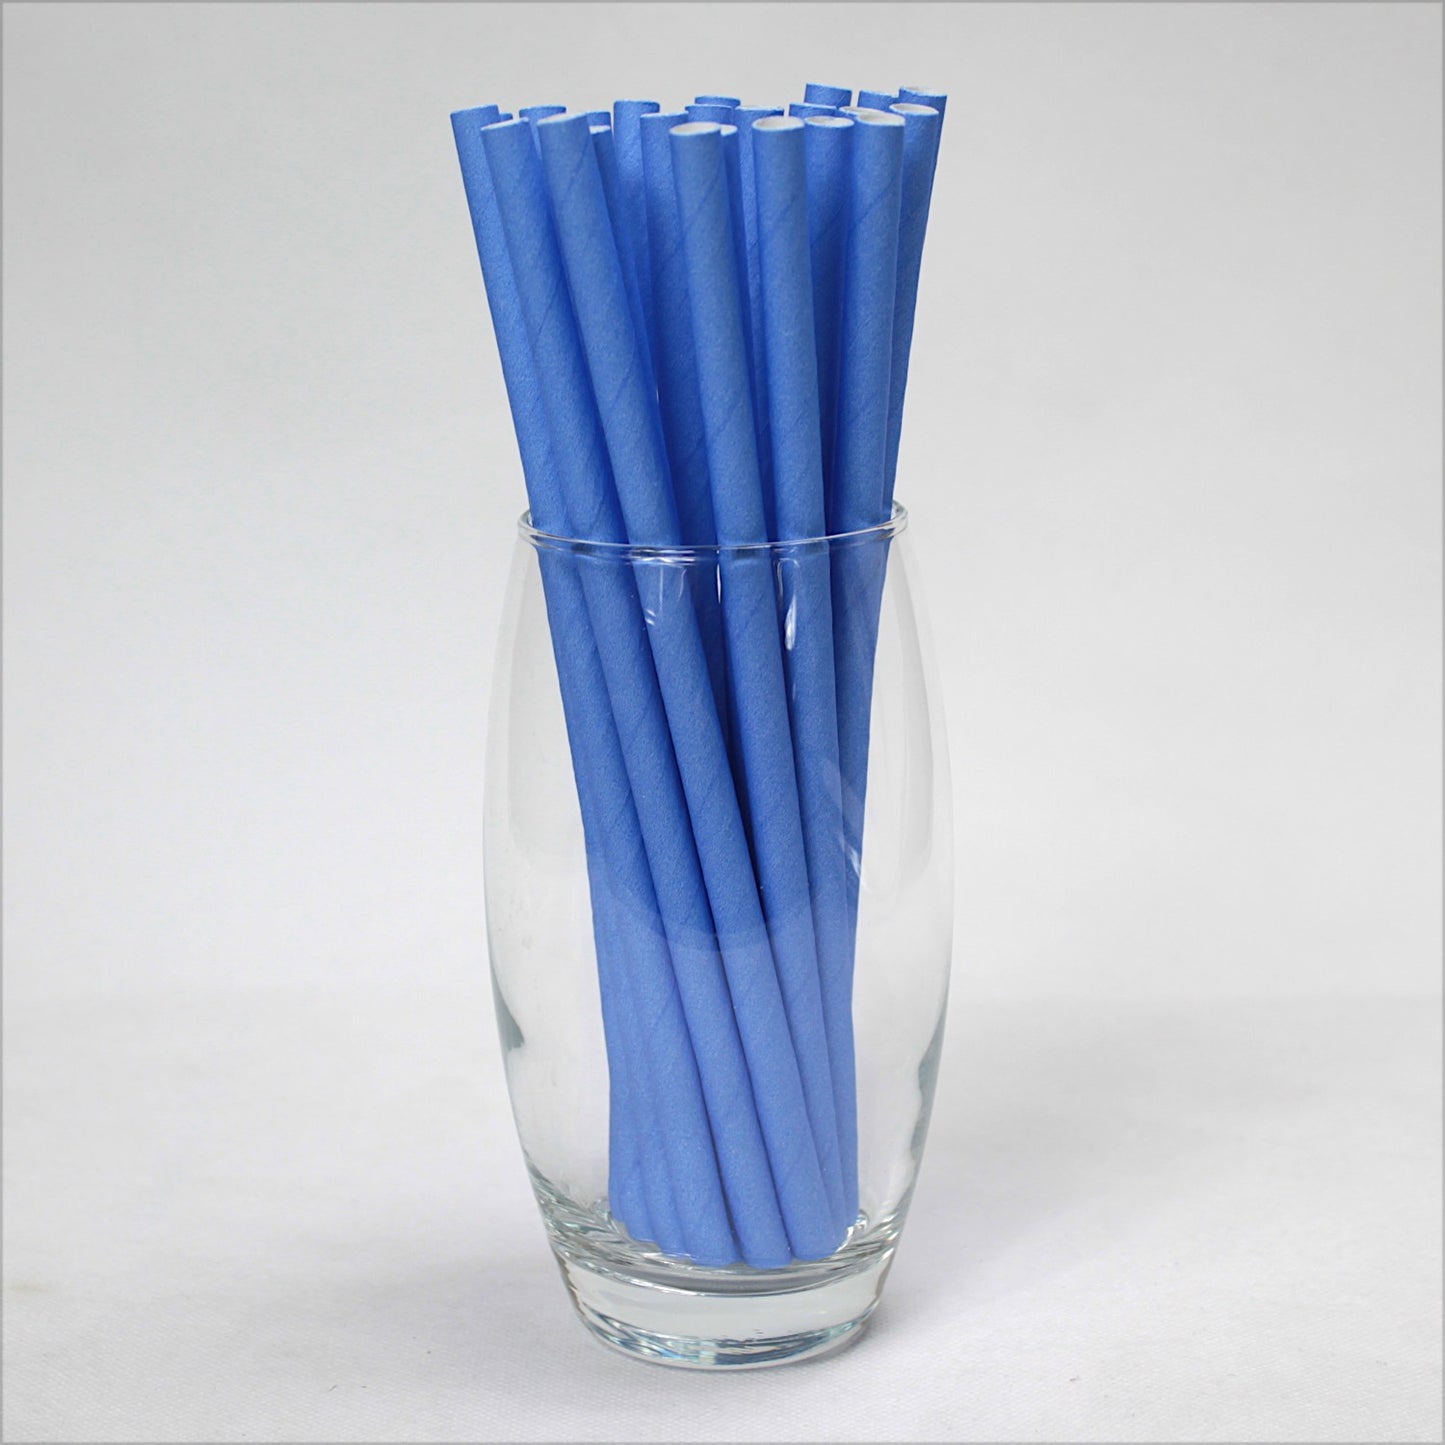 Blue Paper Straws (8mm x 200mm) - Quality Drinking Straws for Smoothies and Milkshakes - Intrinsic Paper Straws